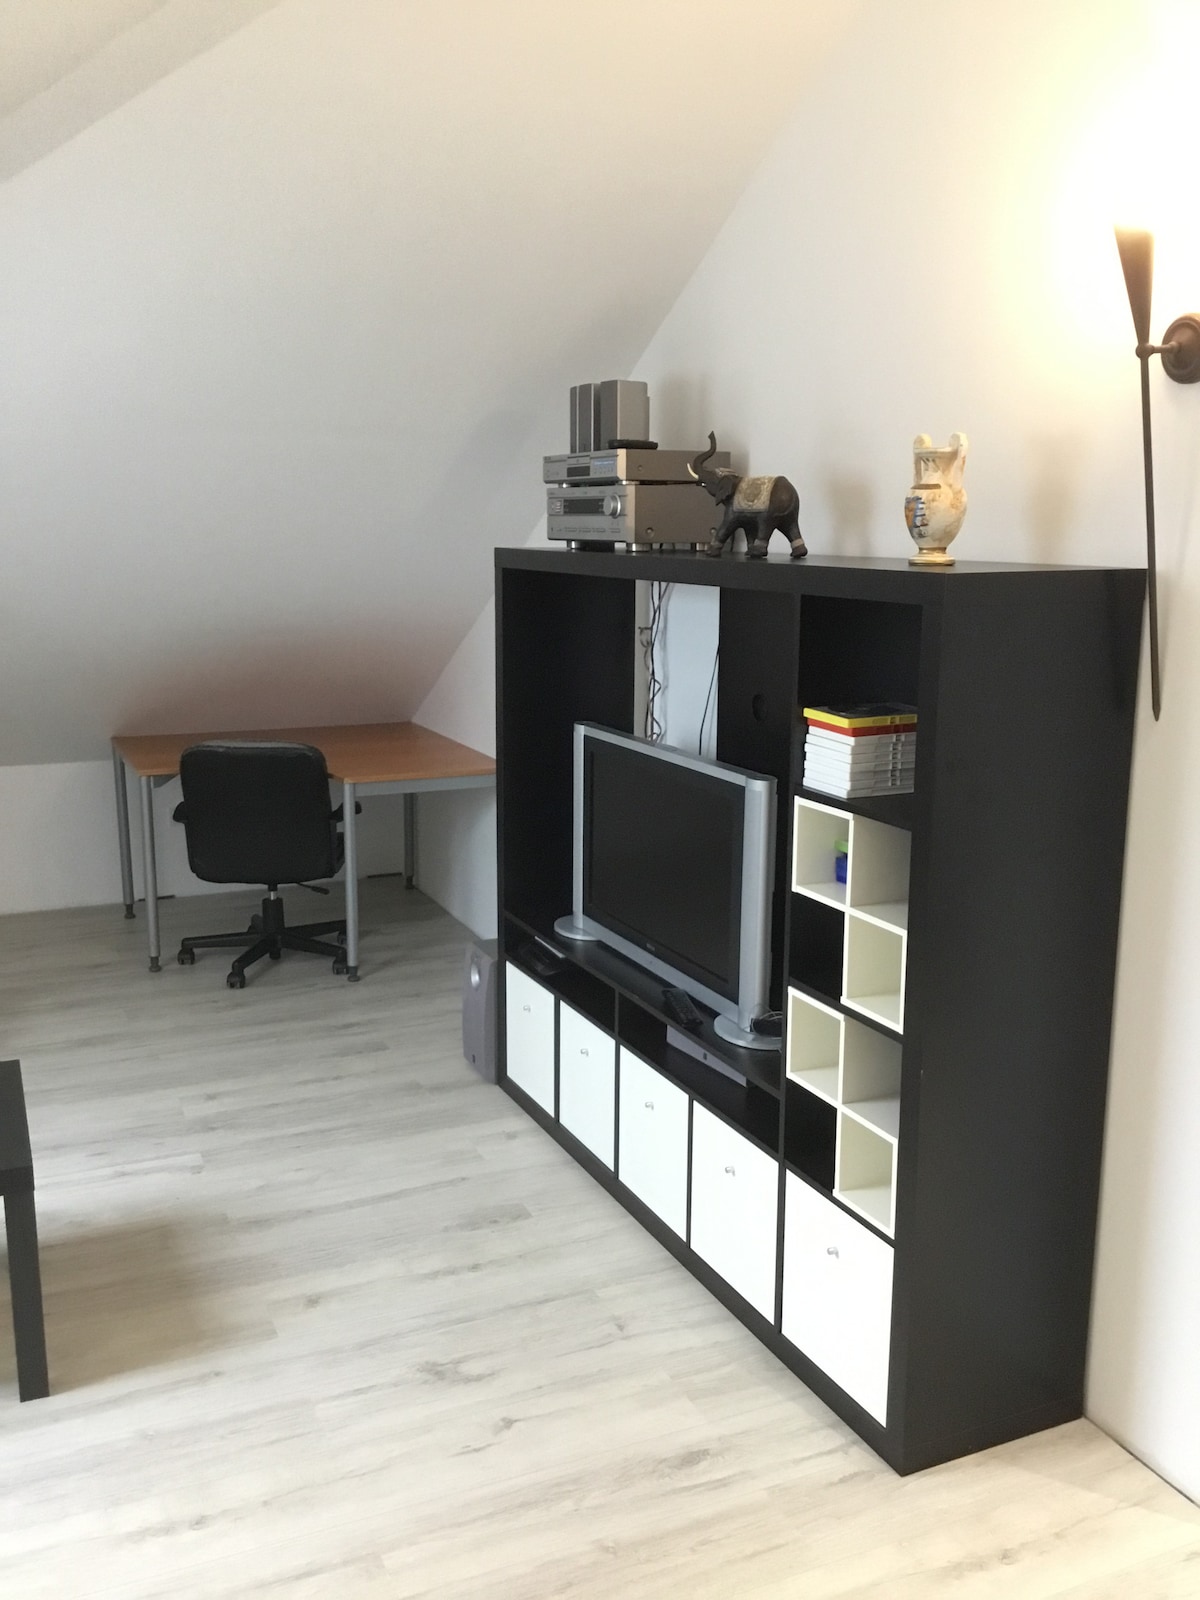 Apartment bright and modern - Apartments for Rent in Detmold,  Nordrhein-Westfalen, Germany - Airbnb